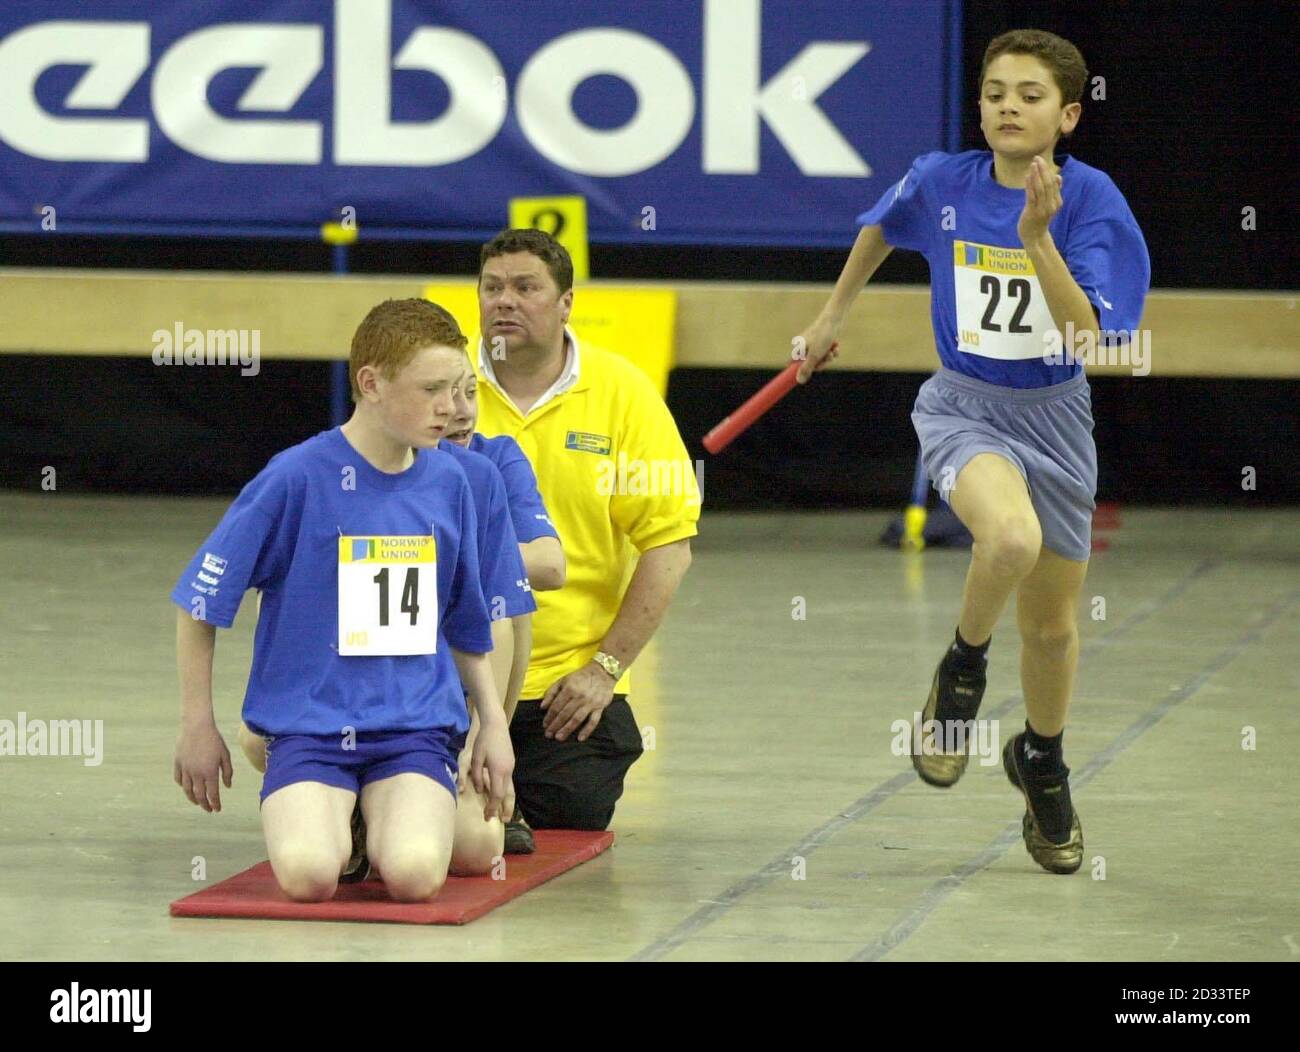 Ellis Harding (No 22) from Nottinghamshire (Under-13 boys) in action during the 4x2 Relay, watched by team-mate Richard Barnes (No 14) during the UK National Final for Young Athletes at the National Indoor Arena, Birmingham. Forty-eight teams from all over the country contested in the final. Stock Photo